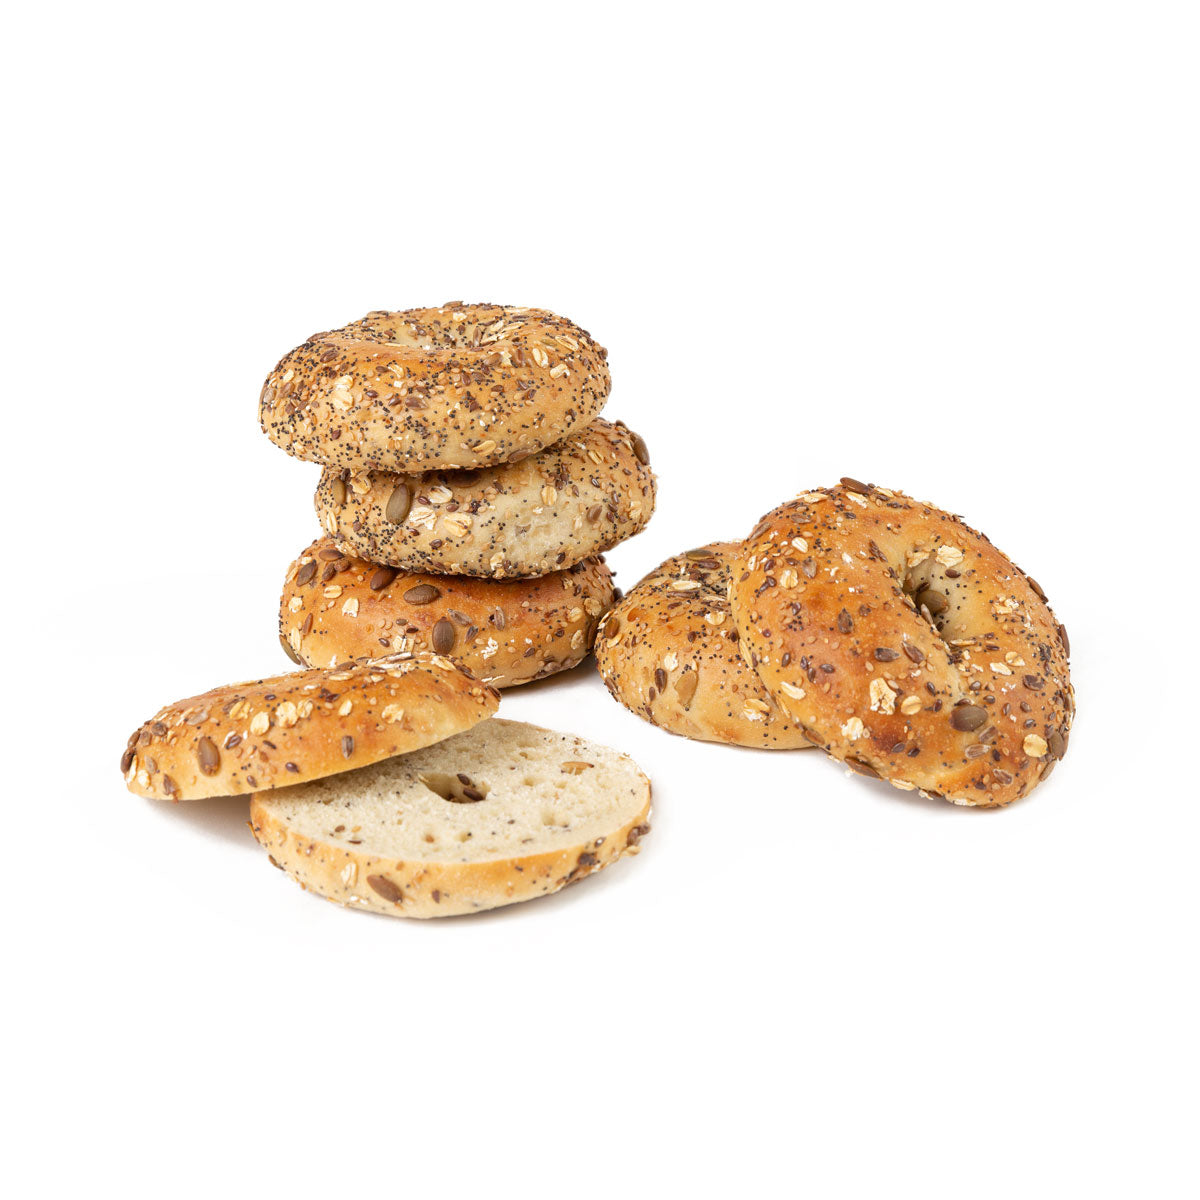 Orwashers Bakery Frozen The Everything Health Bagel 6 CT